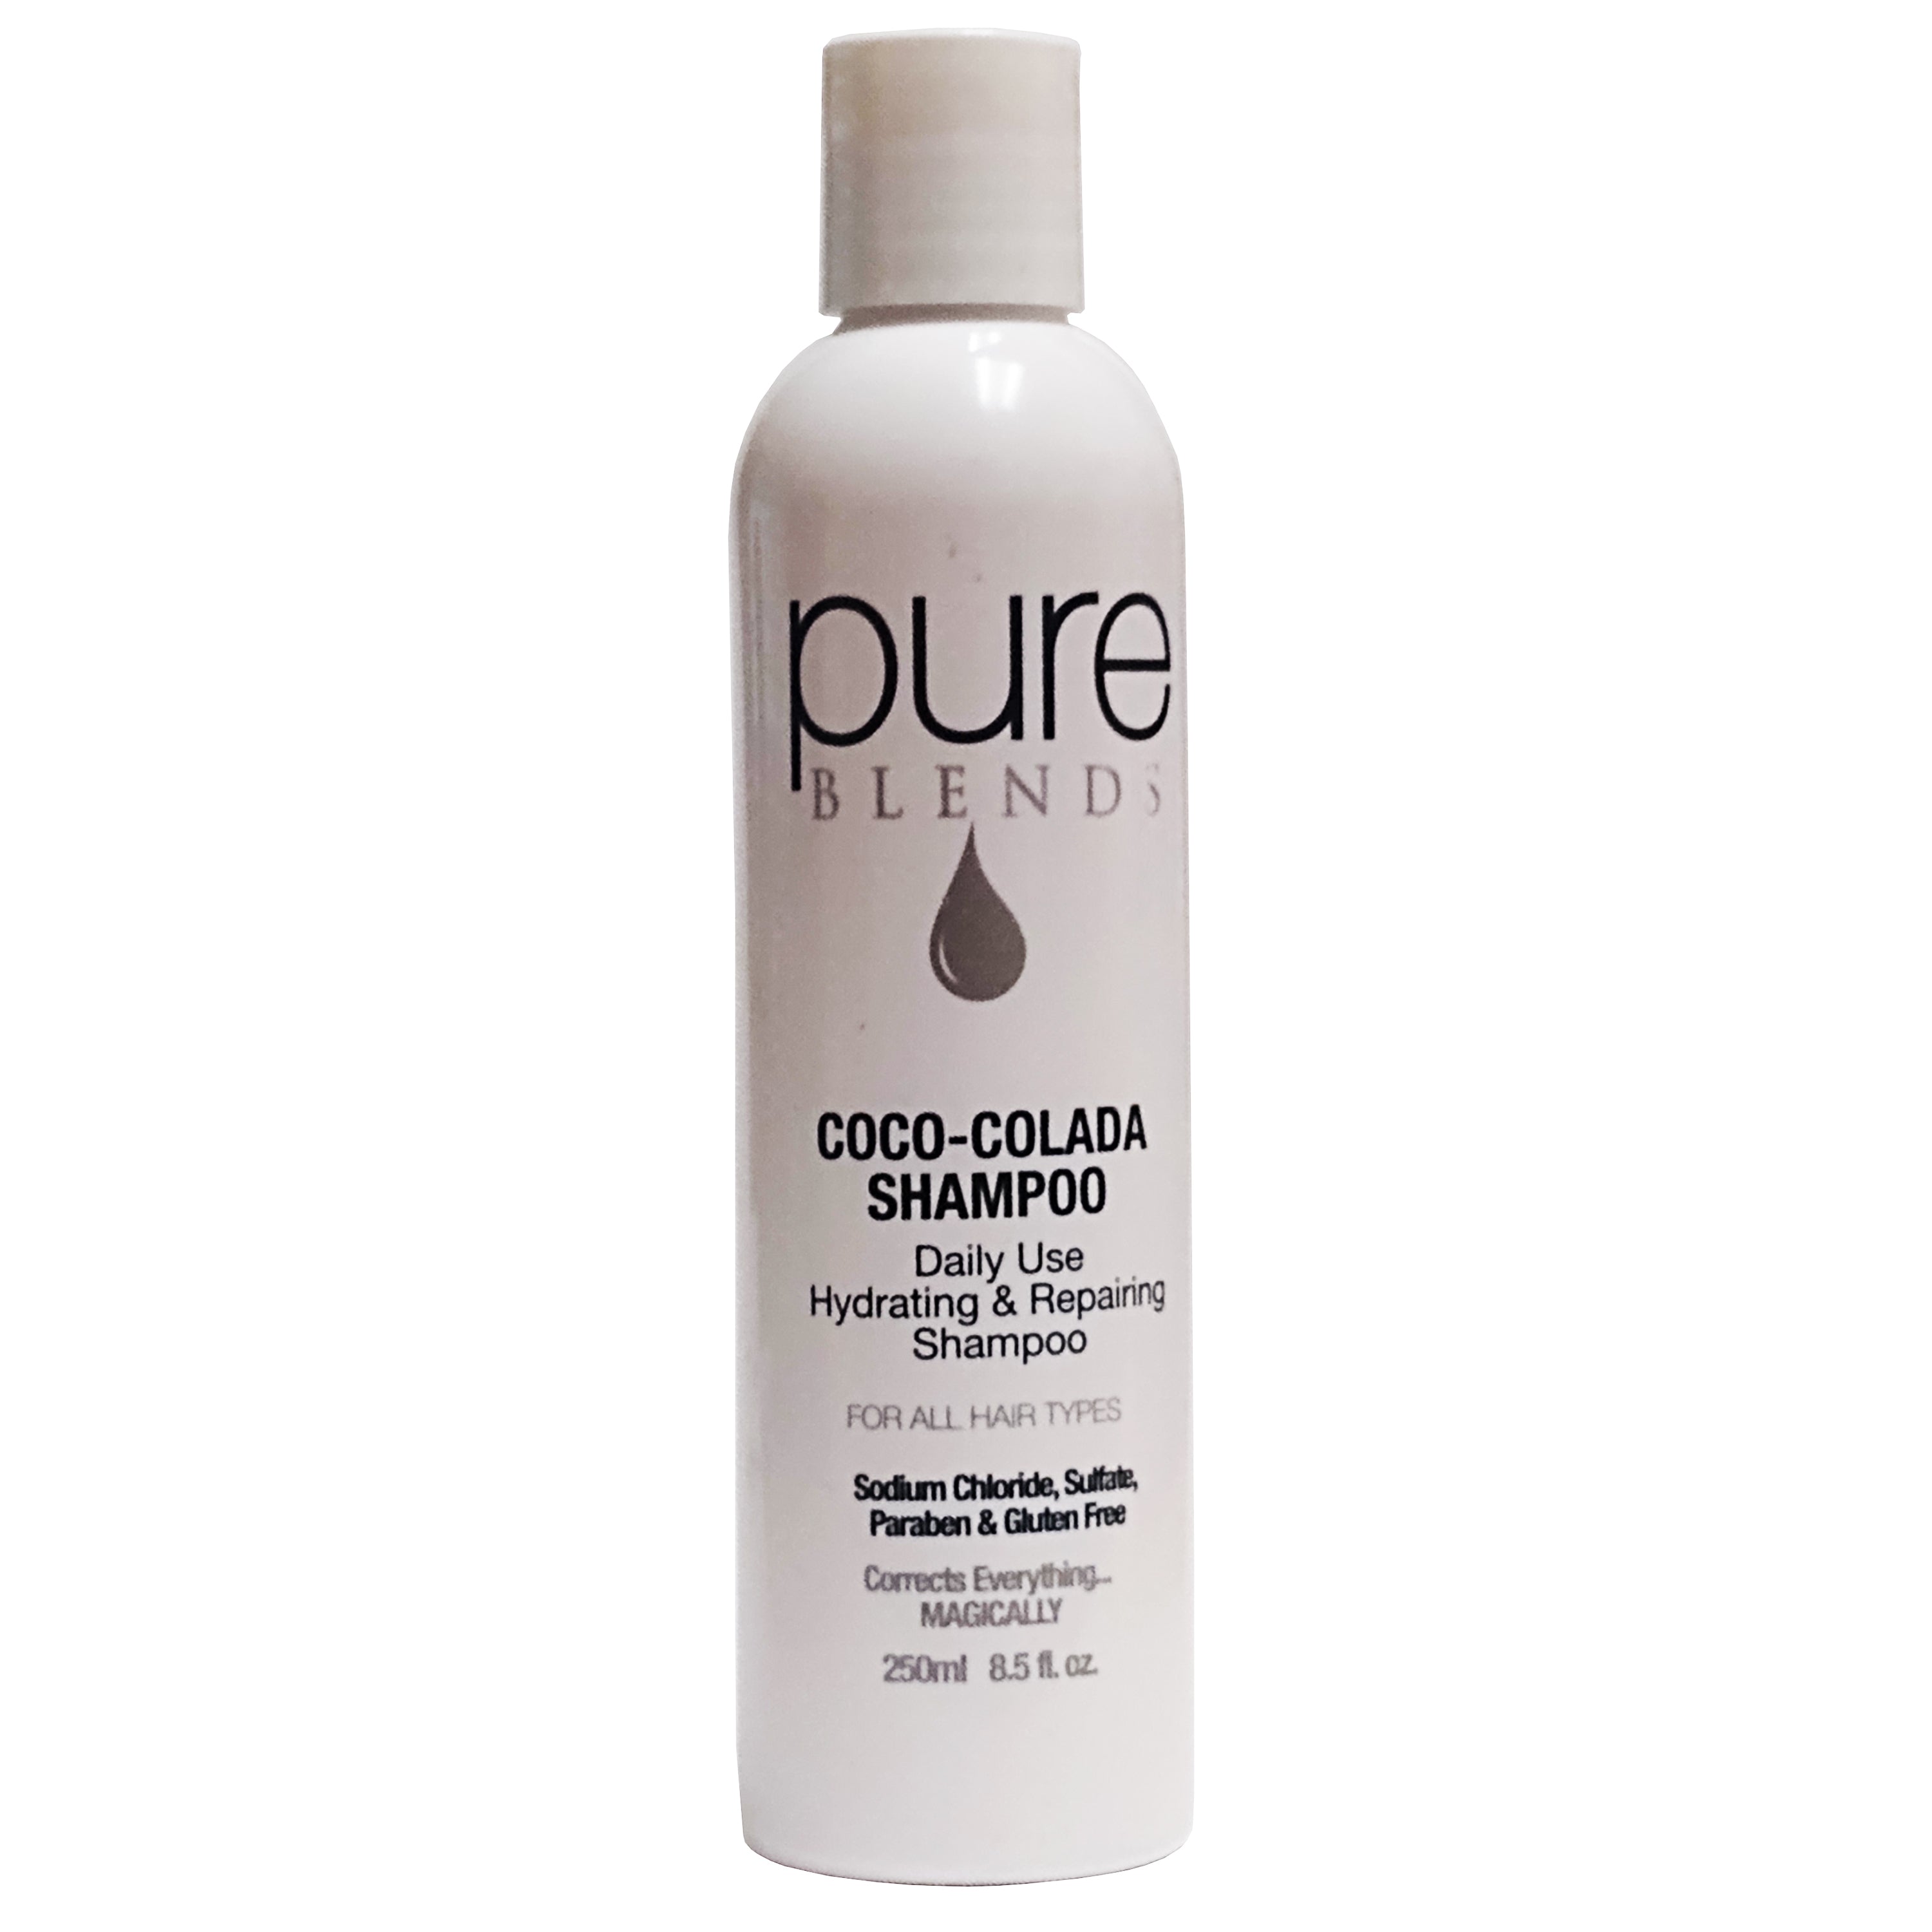 Pure Blends, Daily Use Hydrating & Repairing Shampoo, Coco-Colada,  8.5 oz., 1 Bottle Each, By American Culture Brands